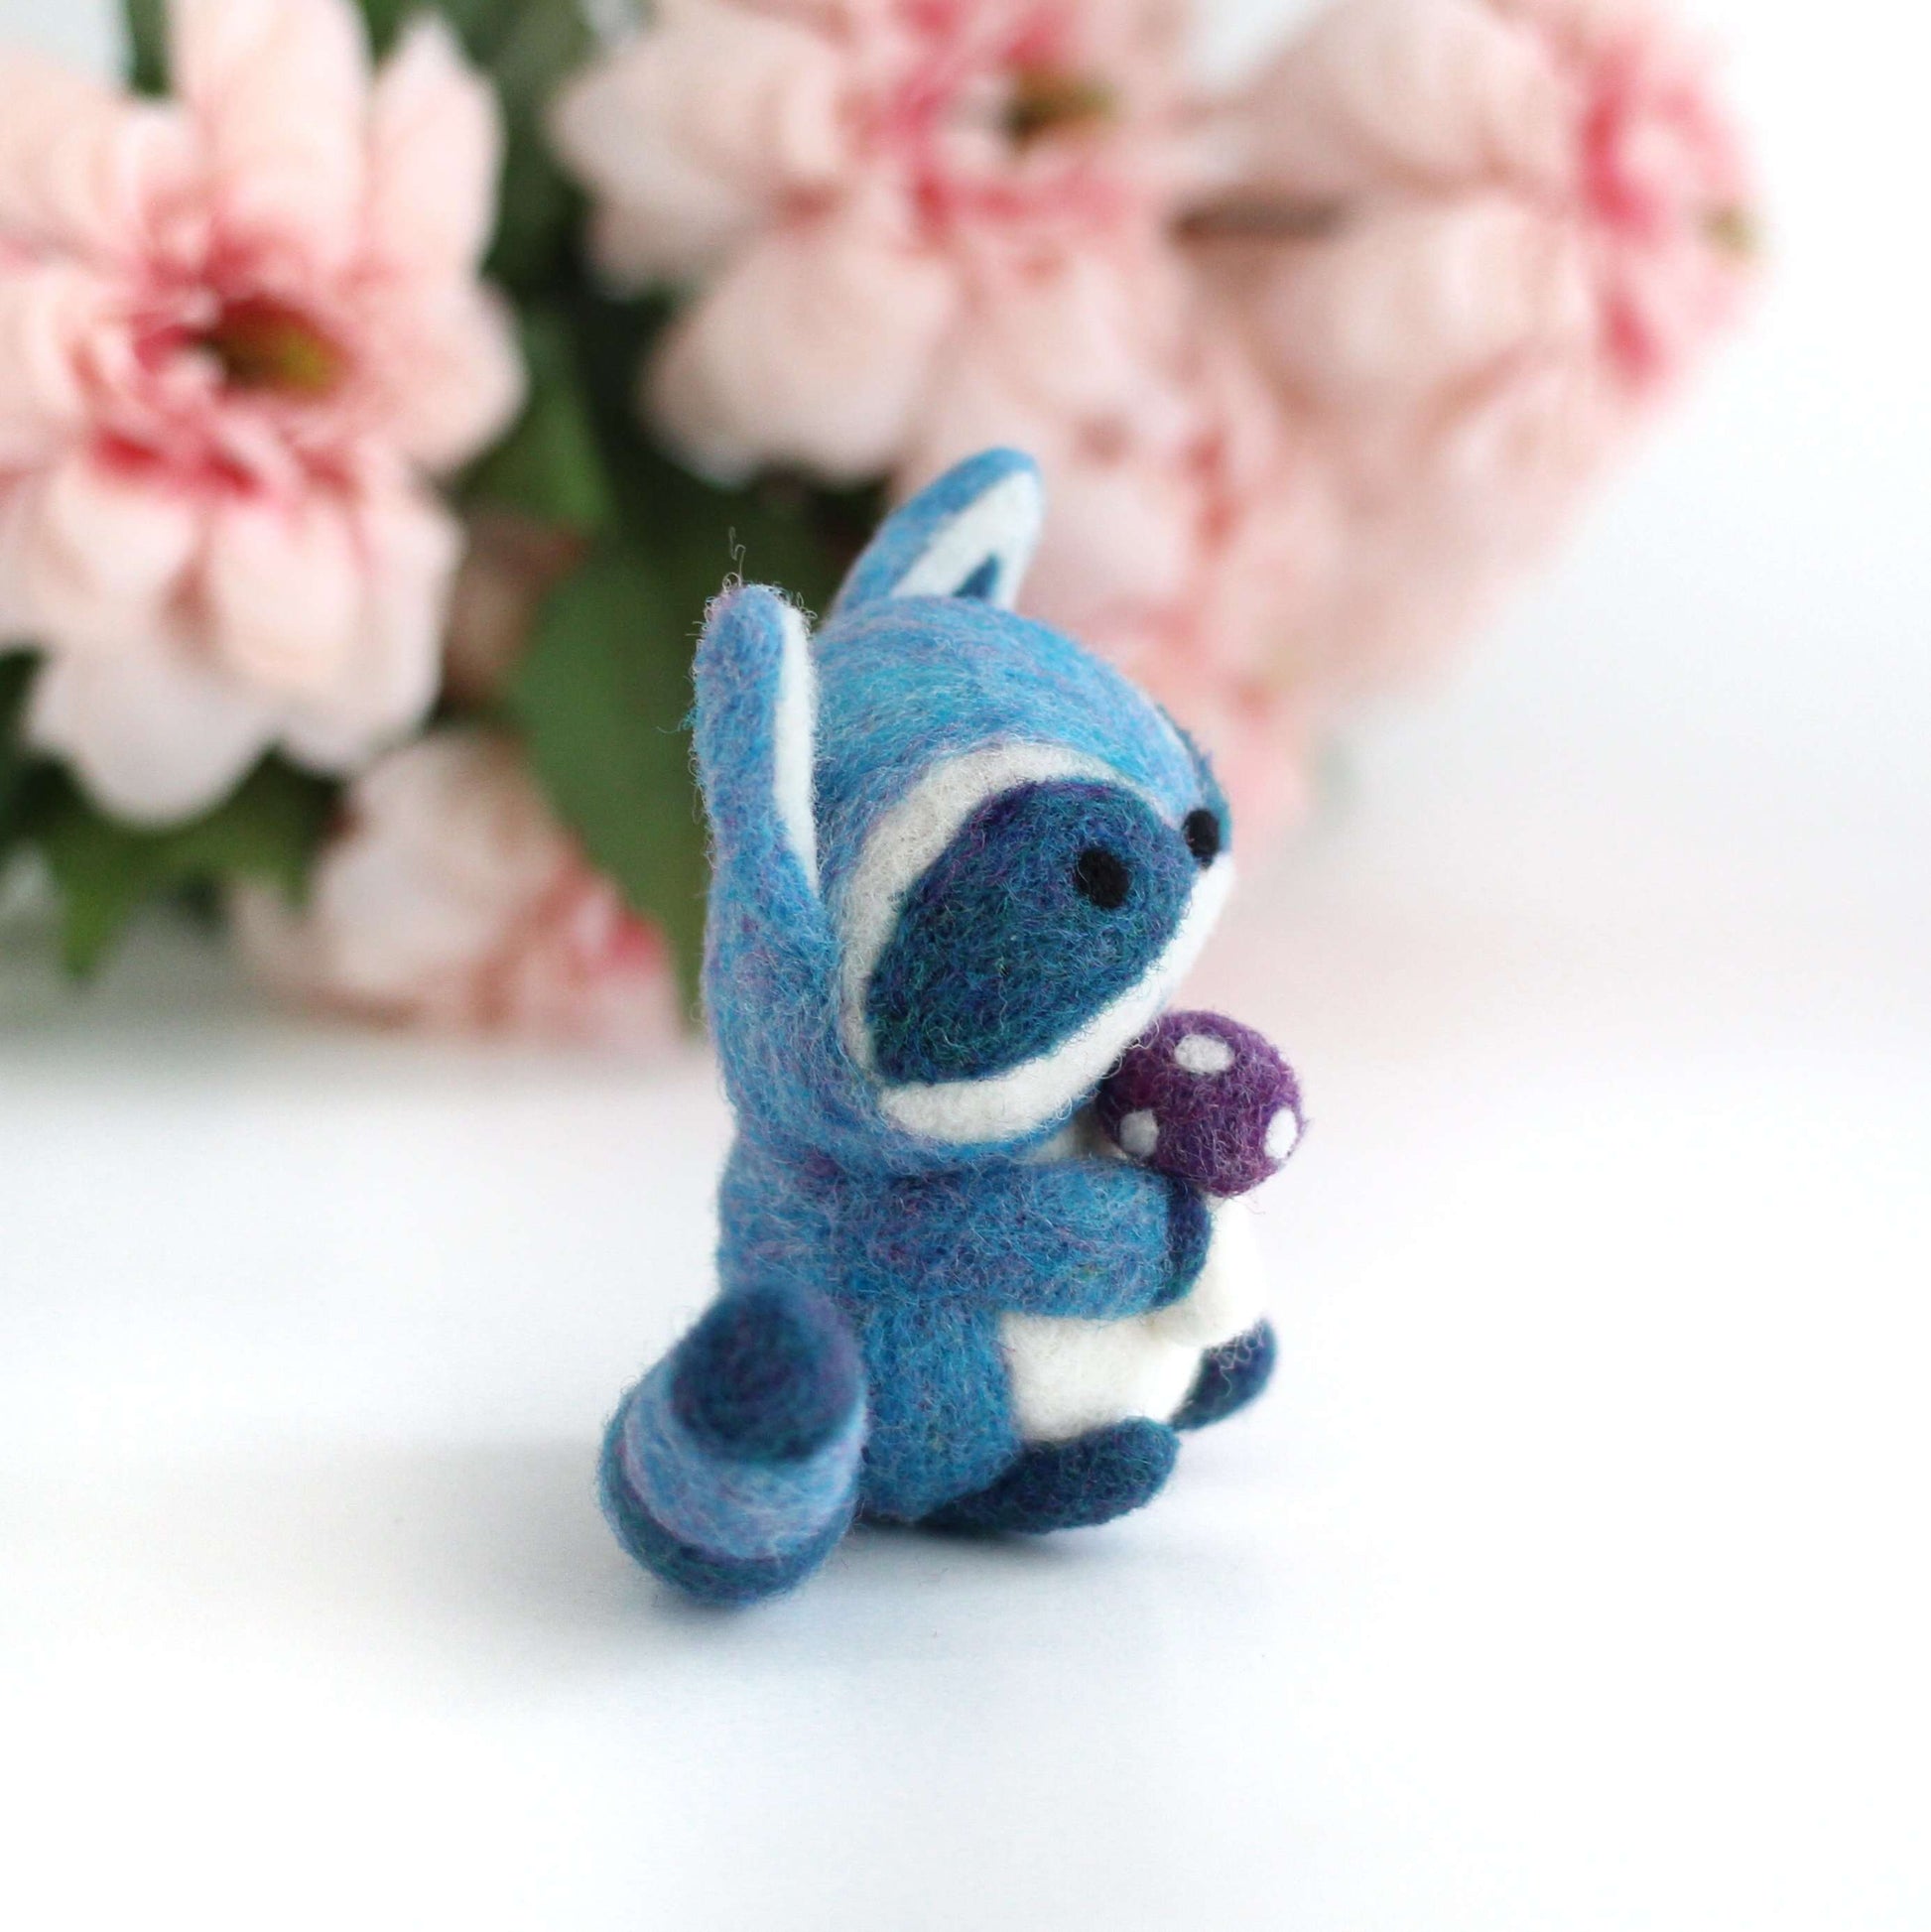 Needle Felted Blue Raccoon with Magical Mushroom by Wild Whimsy Woolies